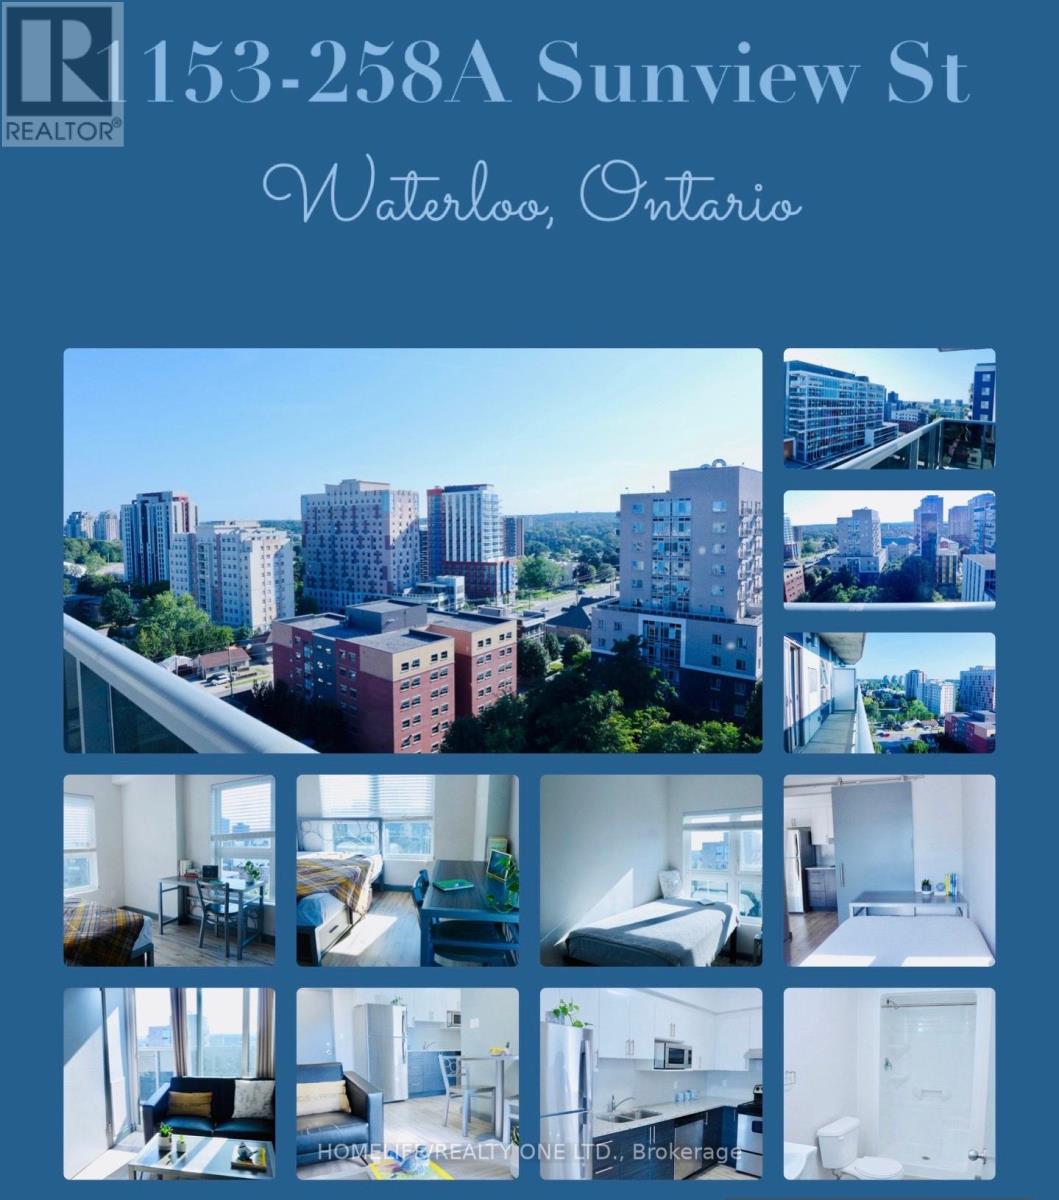 #1153 -258A SUNVIEW ST, waterloo, Ontario